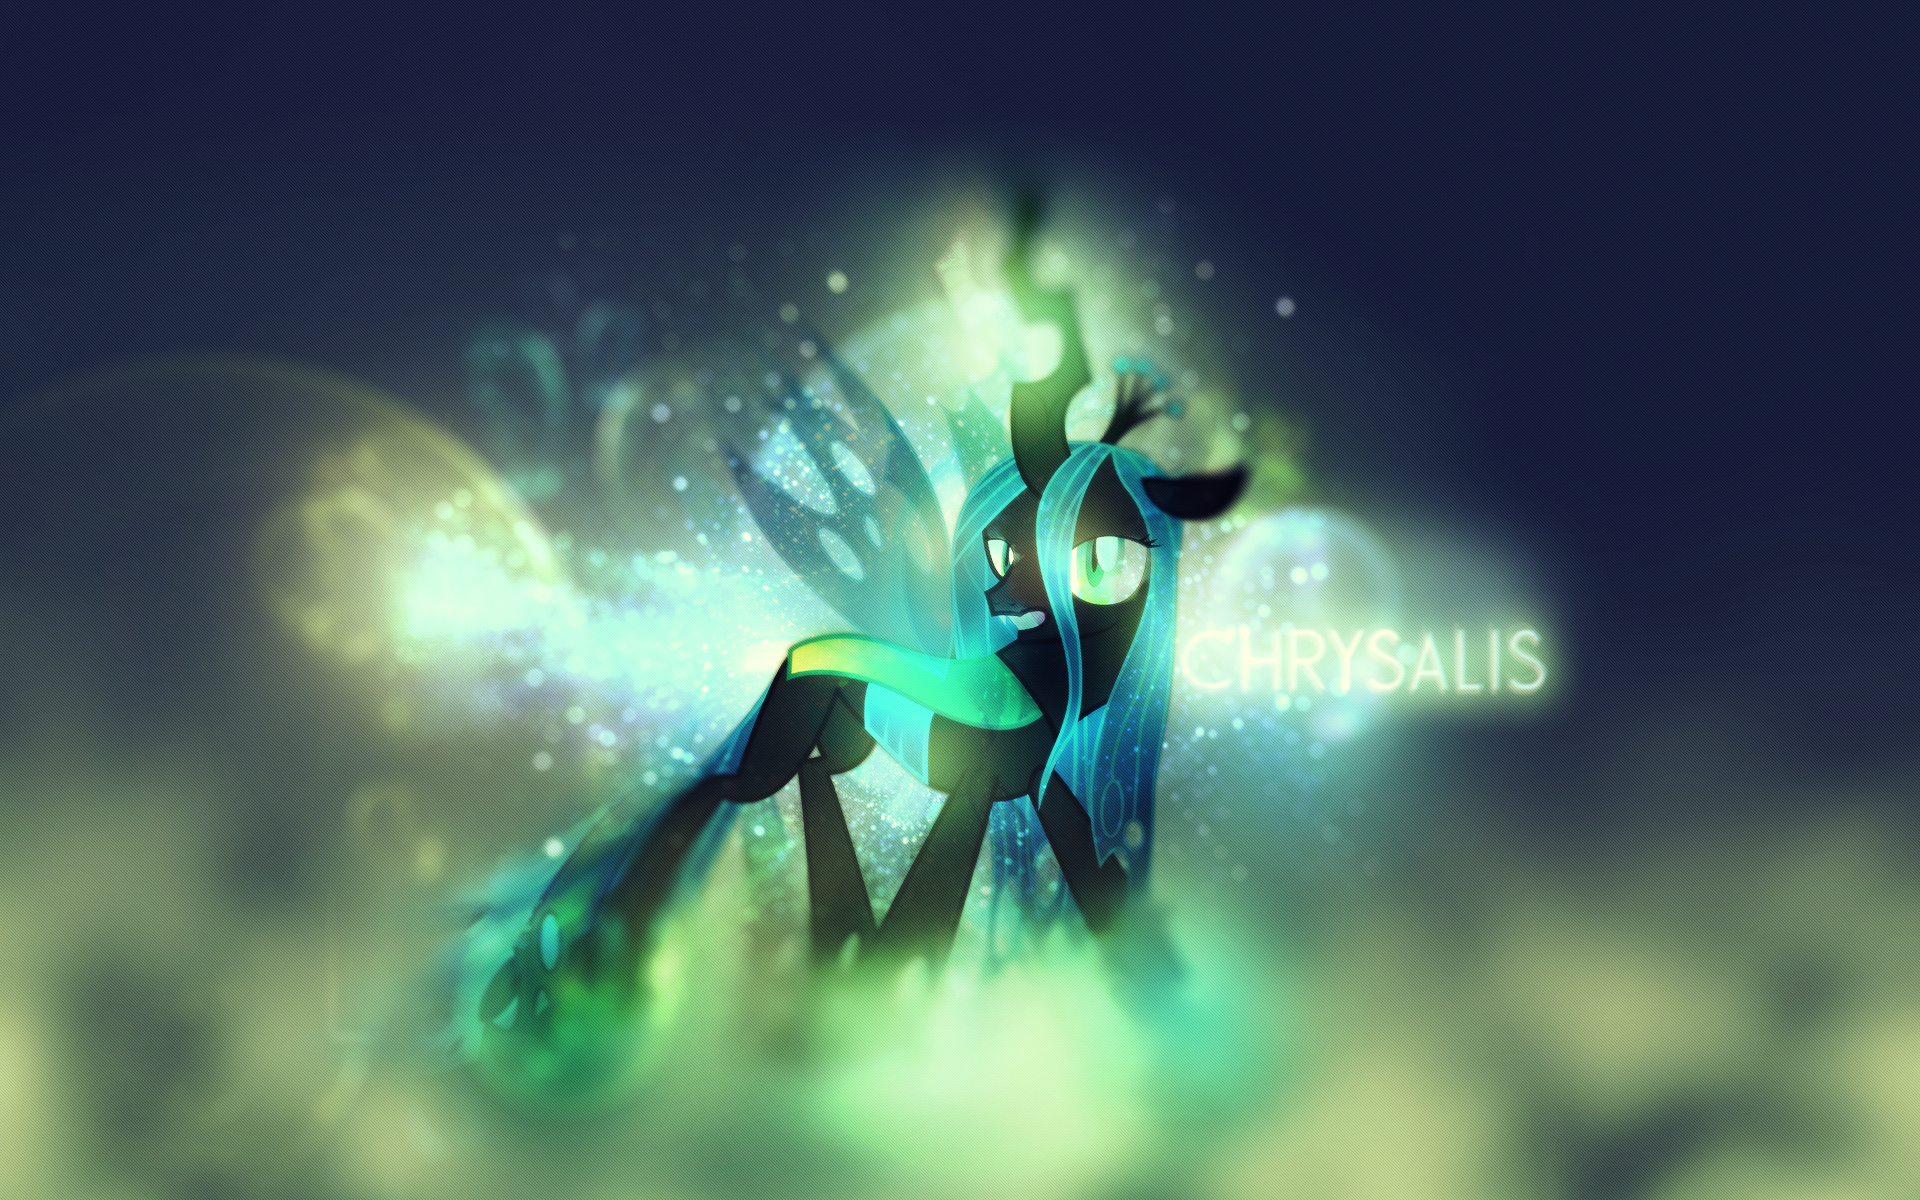 Queen Chrysalis wallpaper by Bommster and Tecknojock